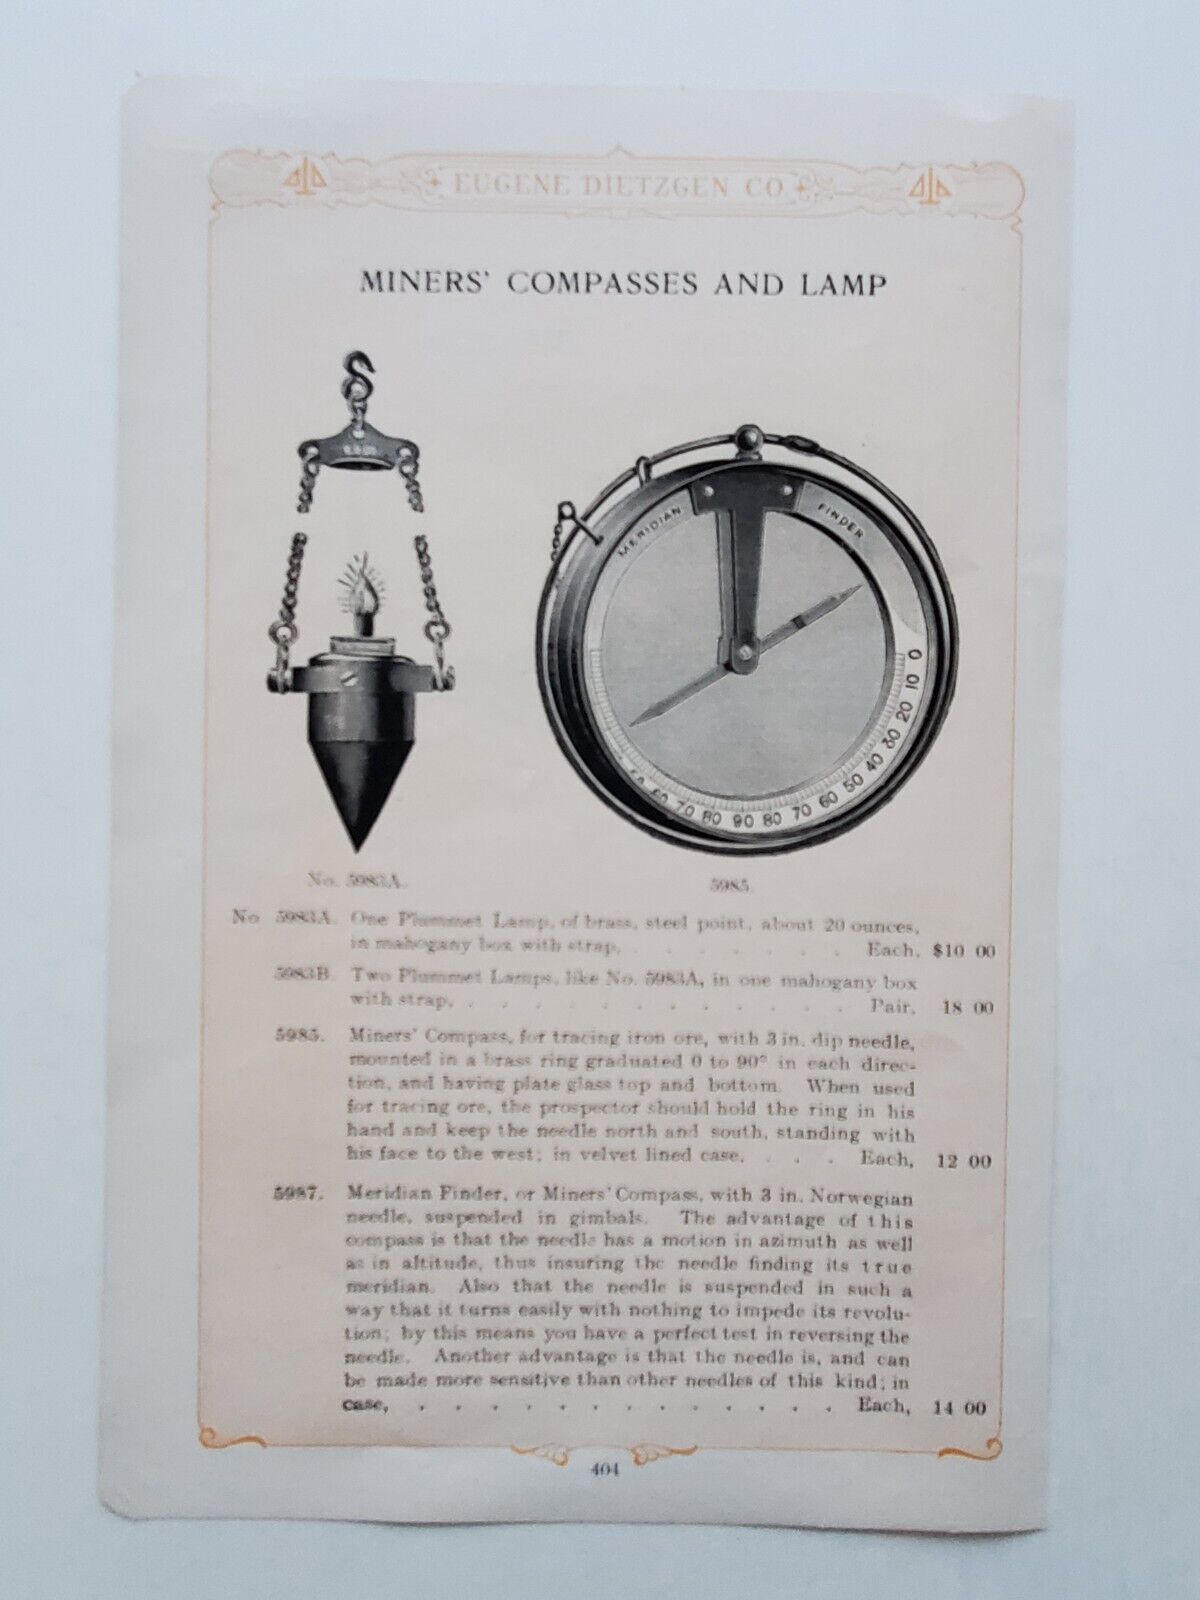 Miners\' Compass or Meridian Finder and Plummet Lamp 1910-1911 Vintage Print Ad